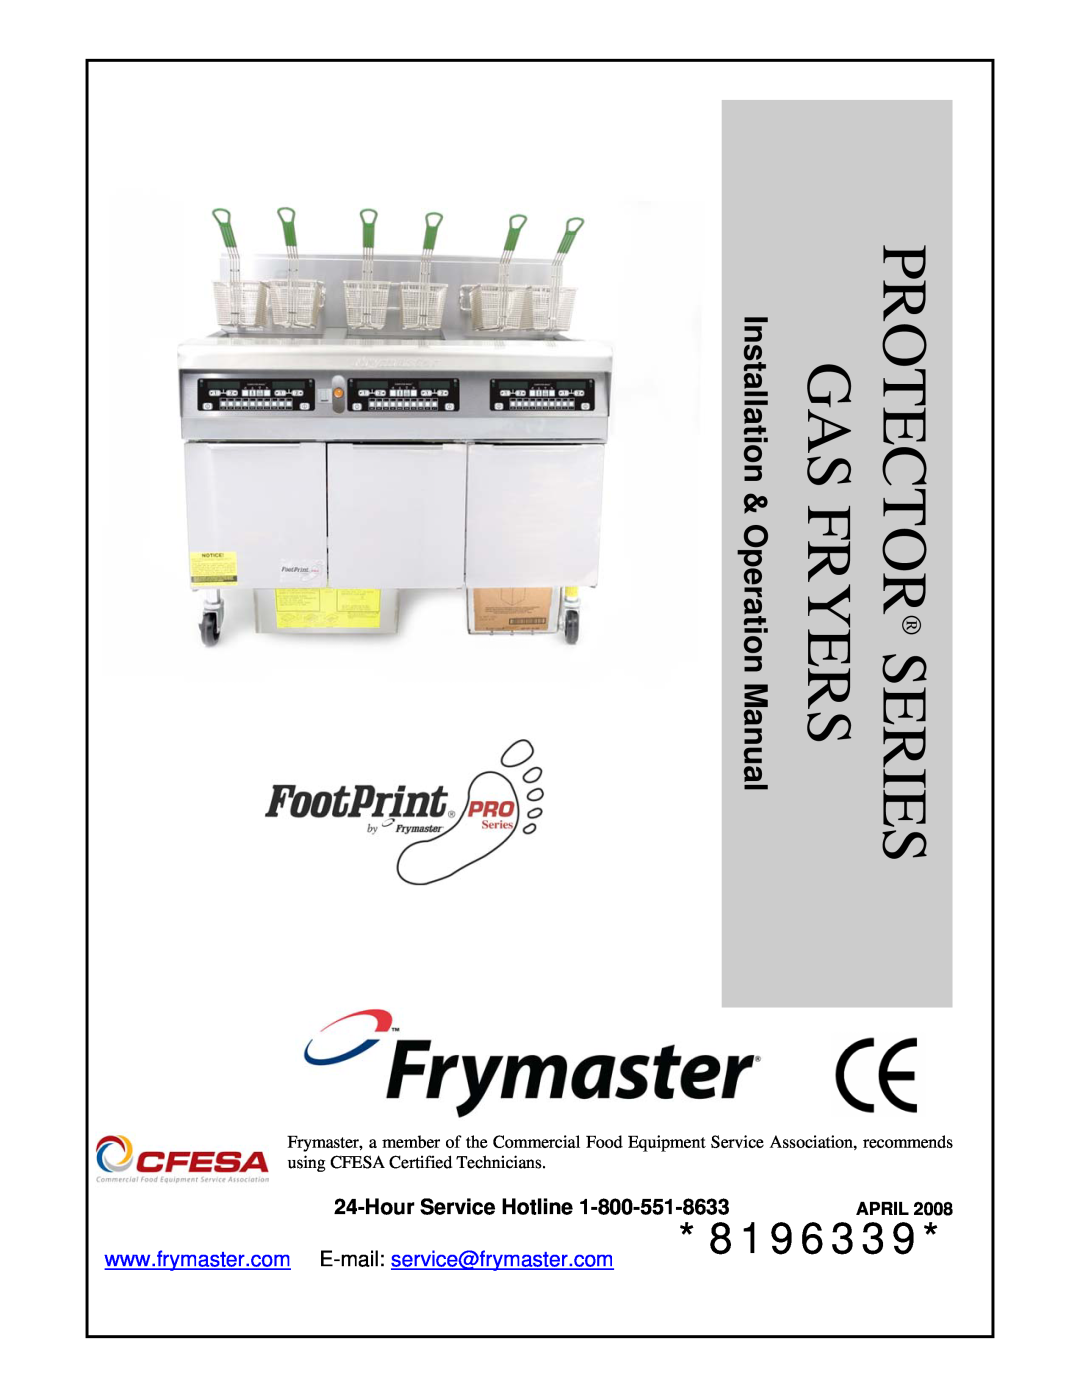 Frymaster 8196339 operation manual Hour Service Hotline, Protector Series Gas Fryers, April 